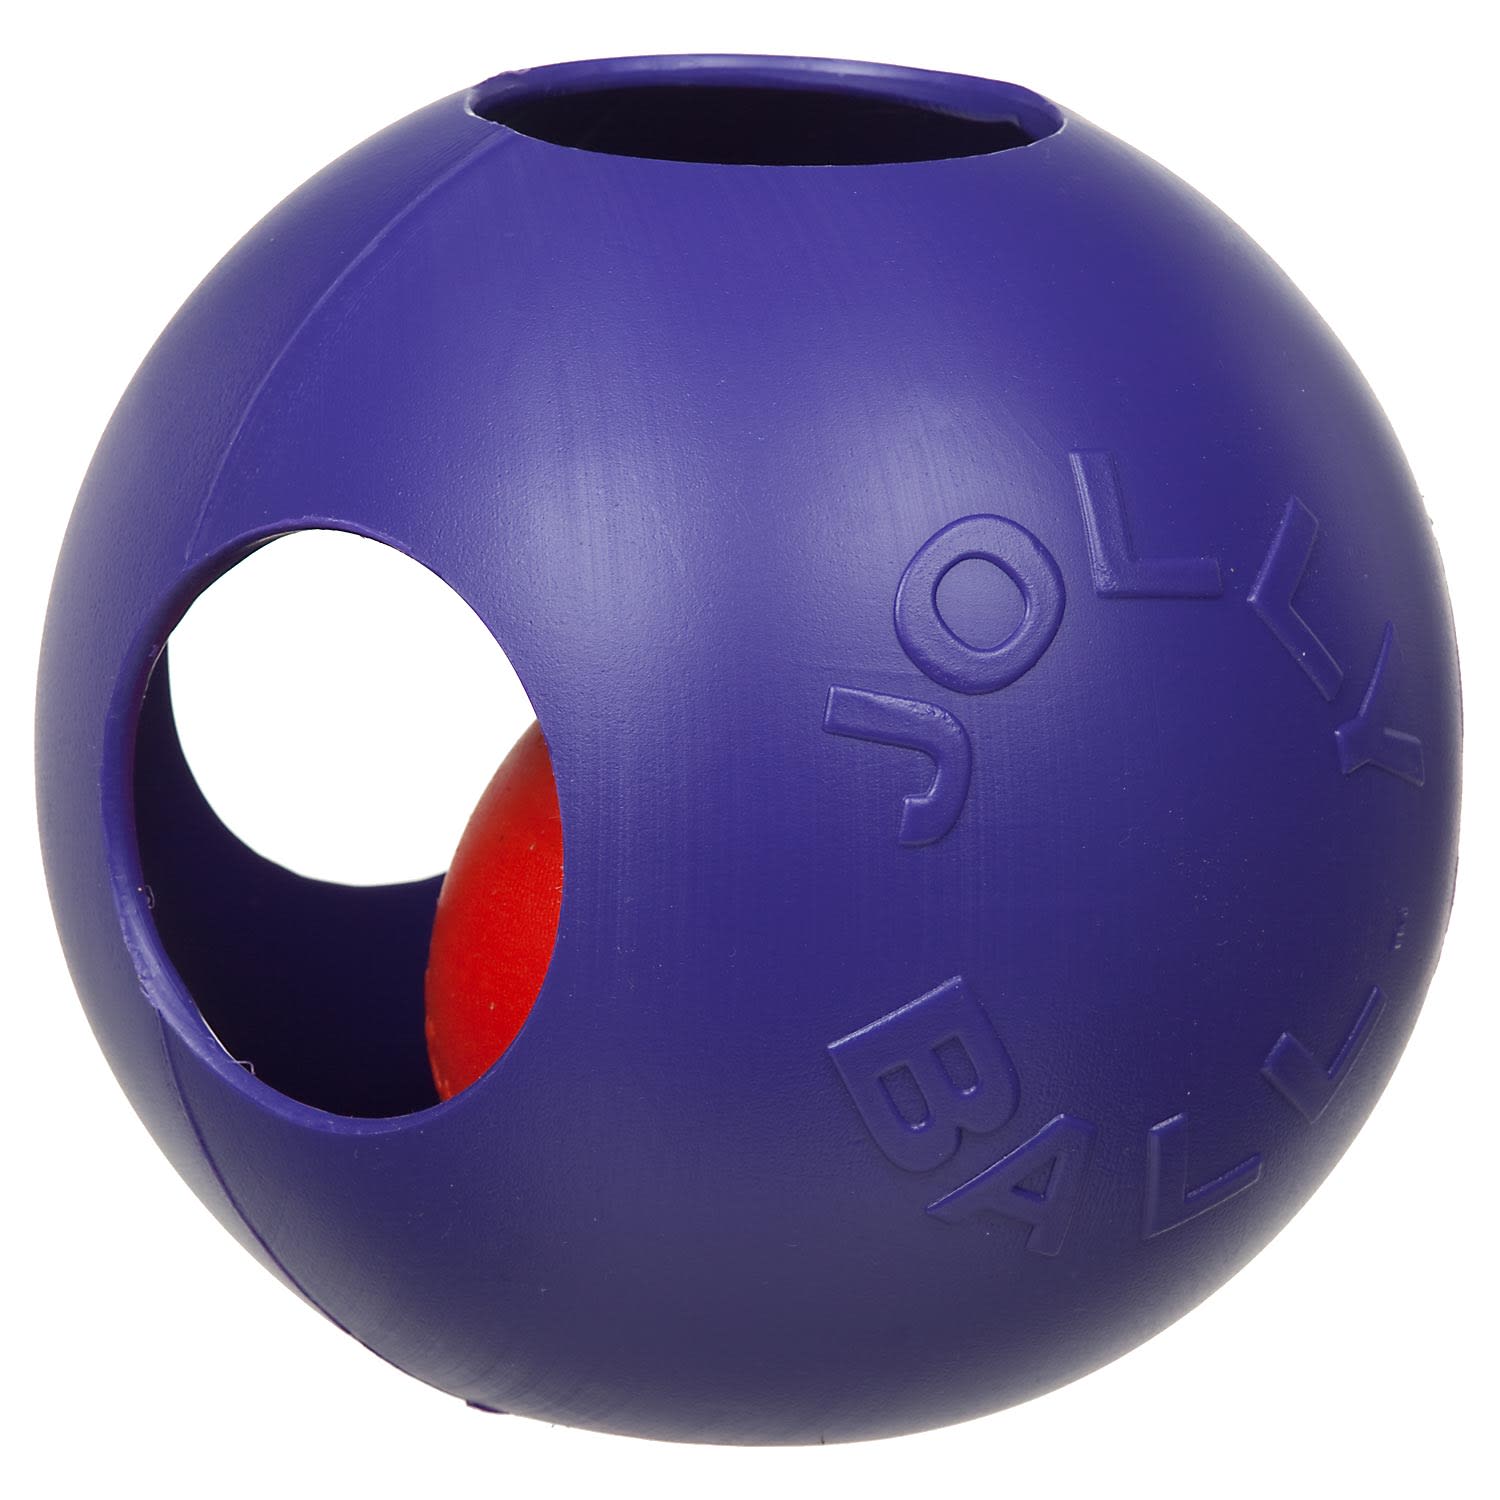 6-Inch Dog Toy Ball Within A Ball Design Jolly Pets Teaser Ball 